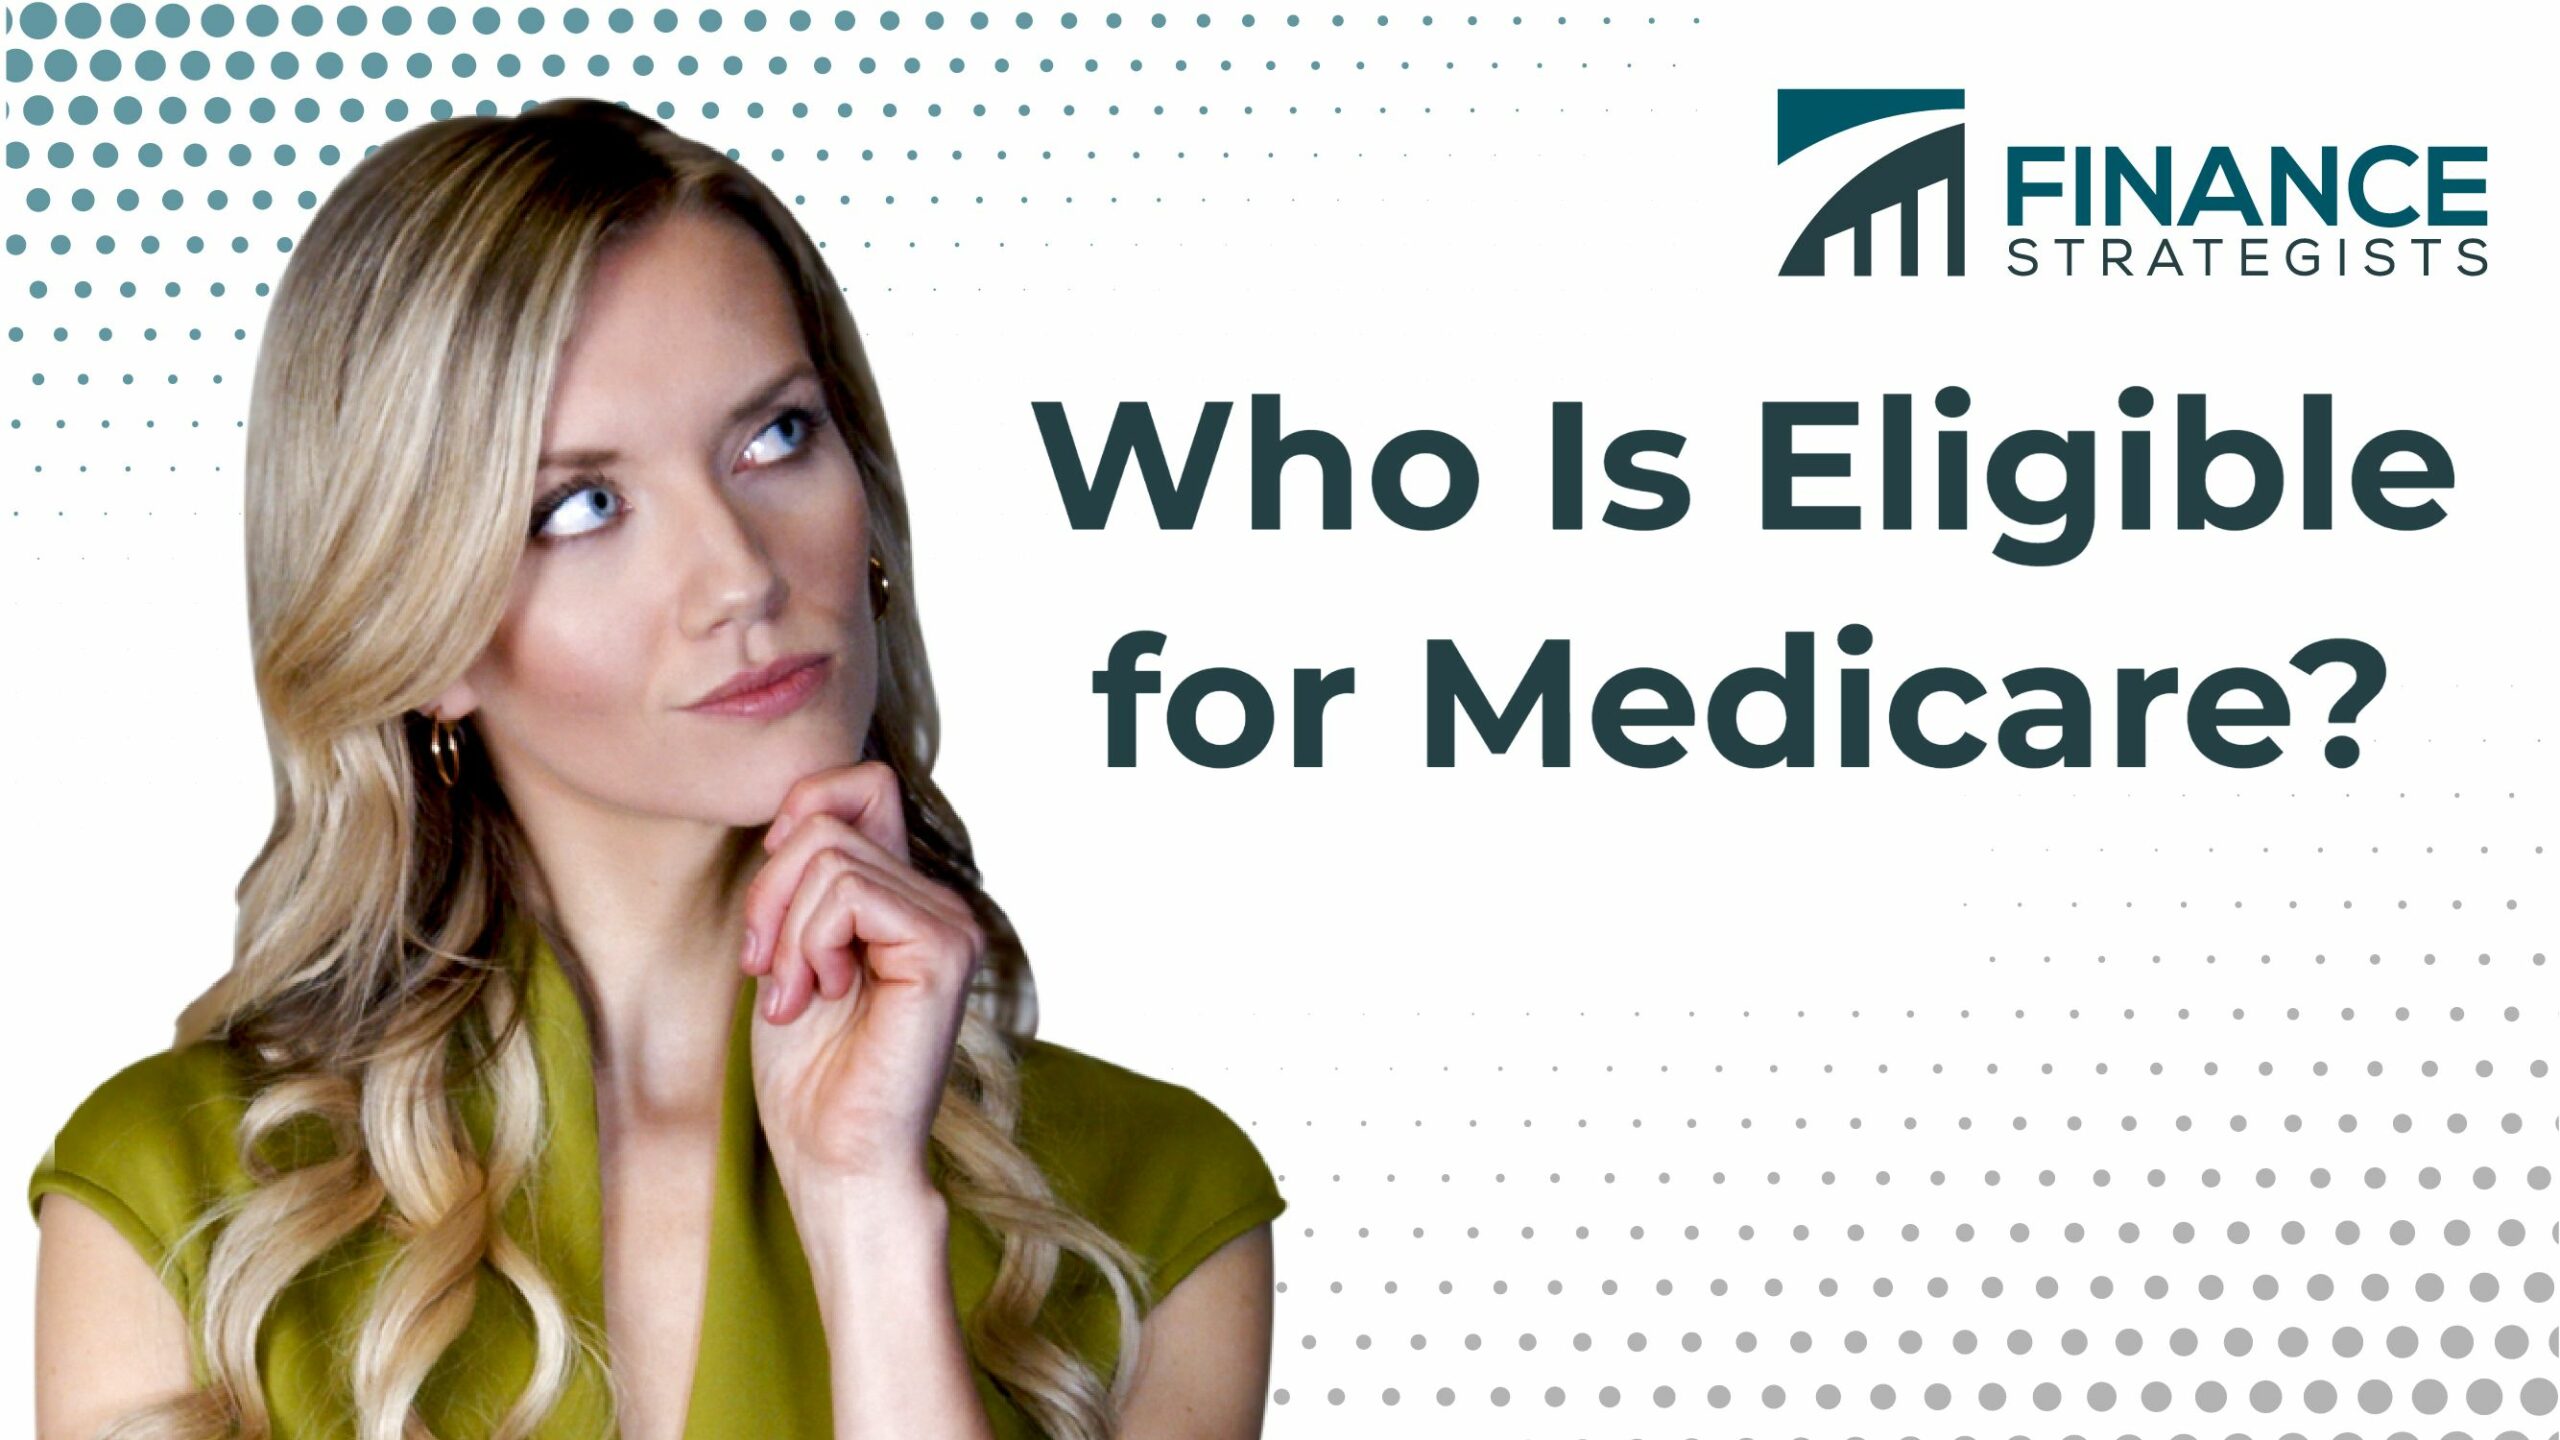 who-is-eligible-for-medicare-finance-strategists